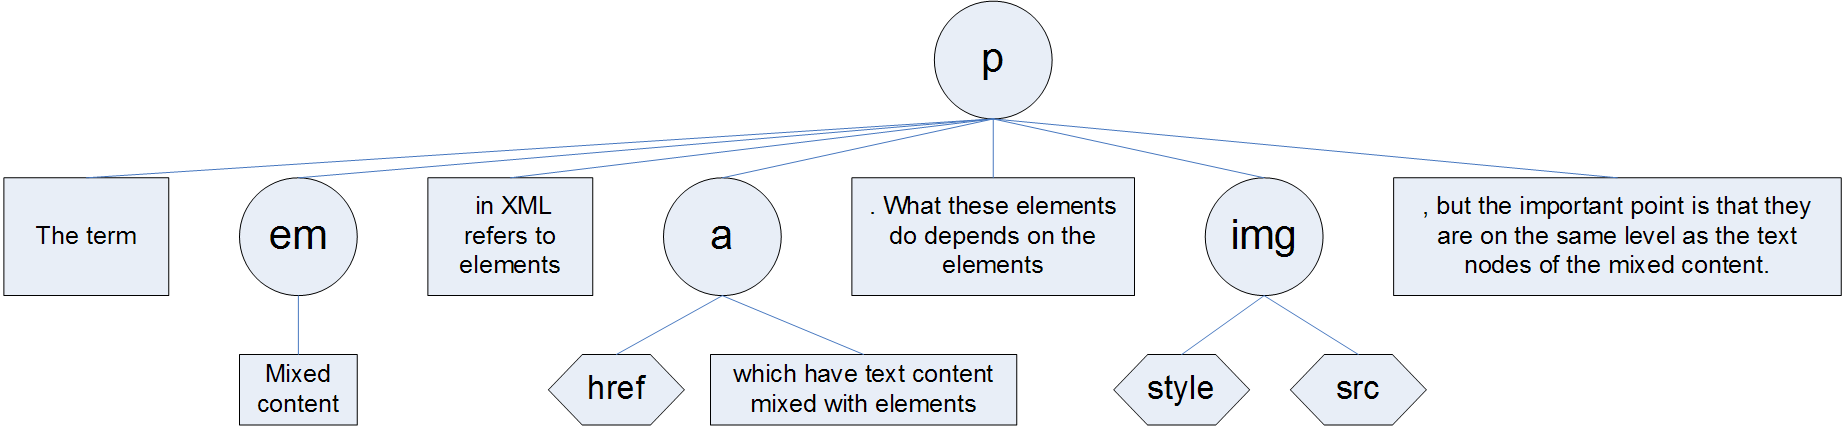 XML tree for mixed content